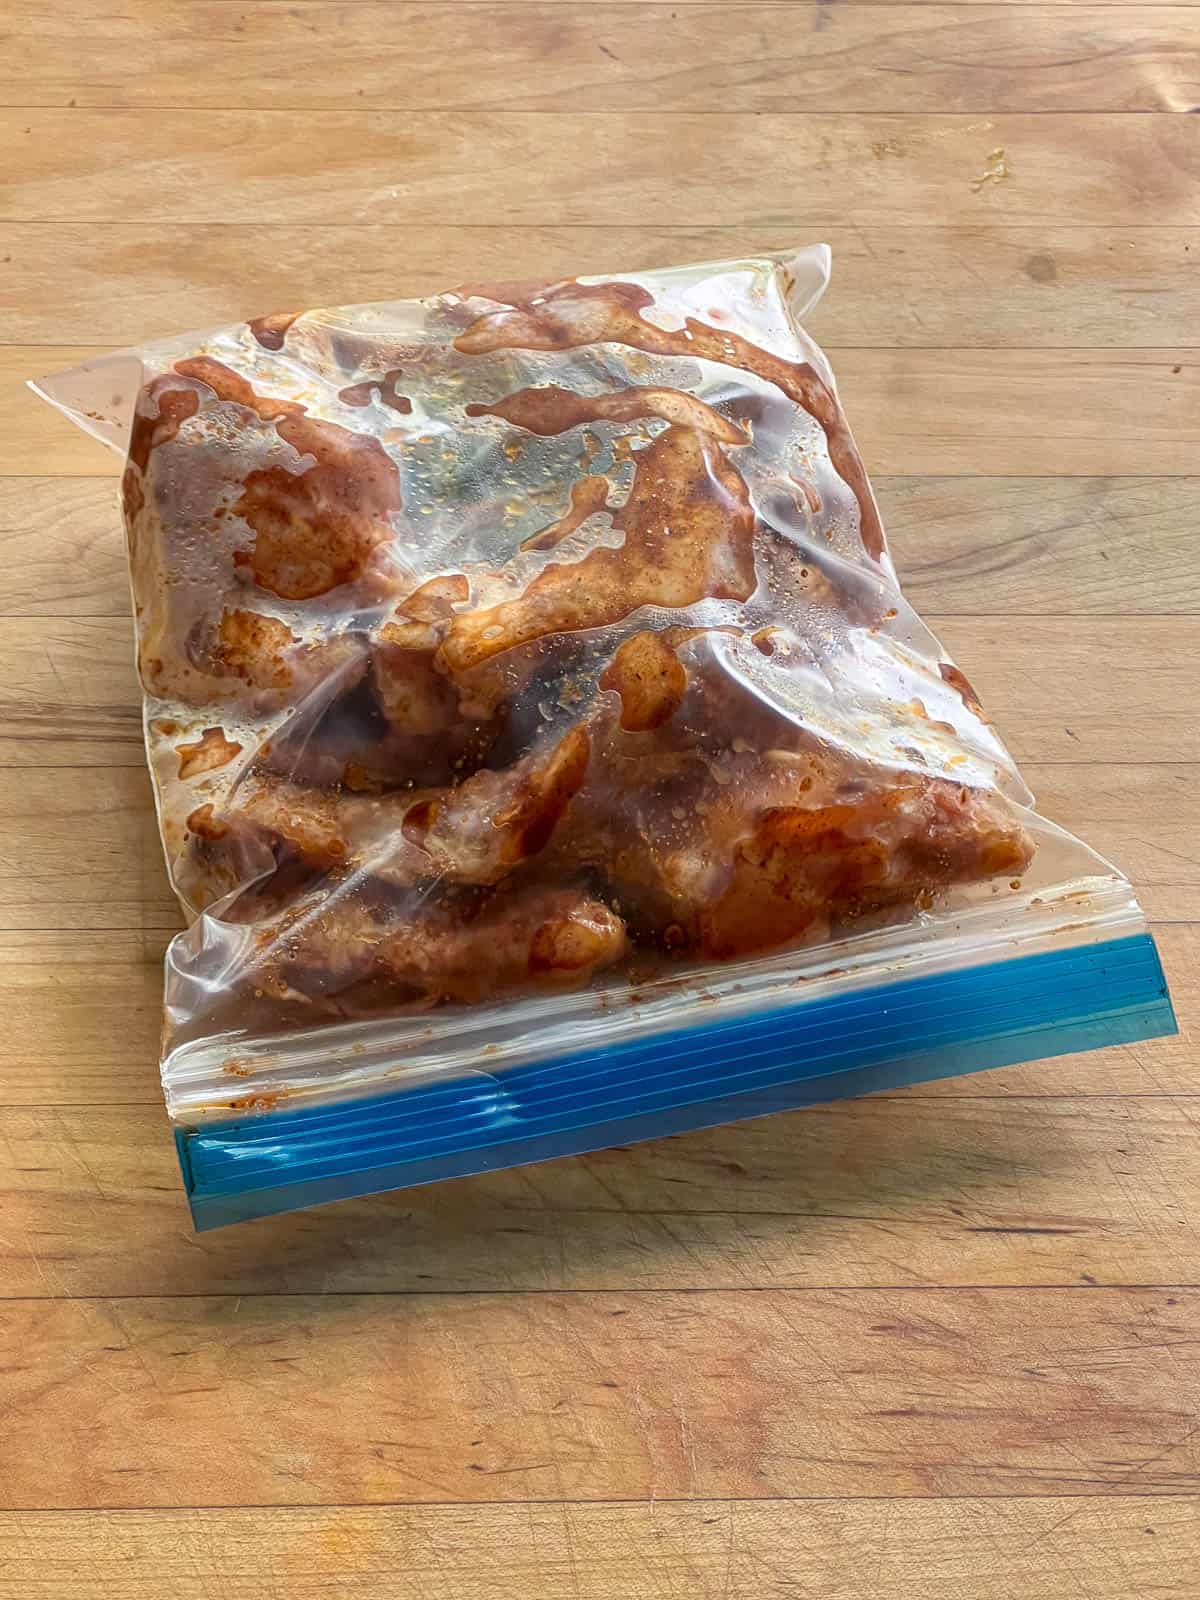 Raw chicken wings marinating in plastic bag.